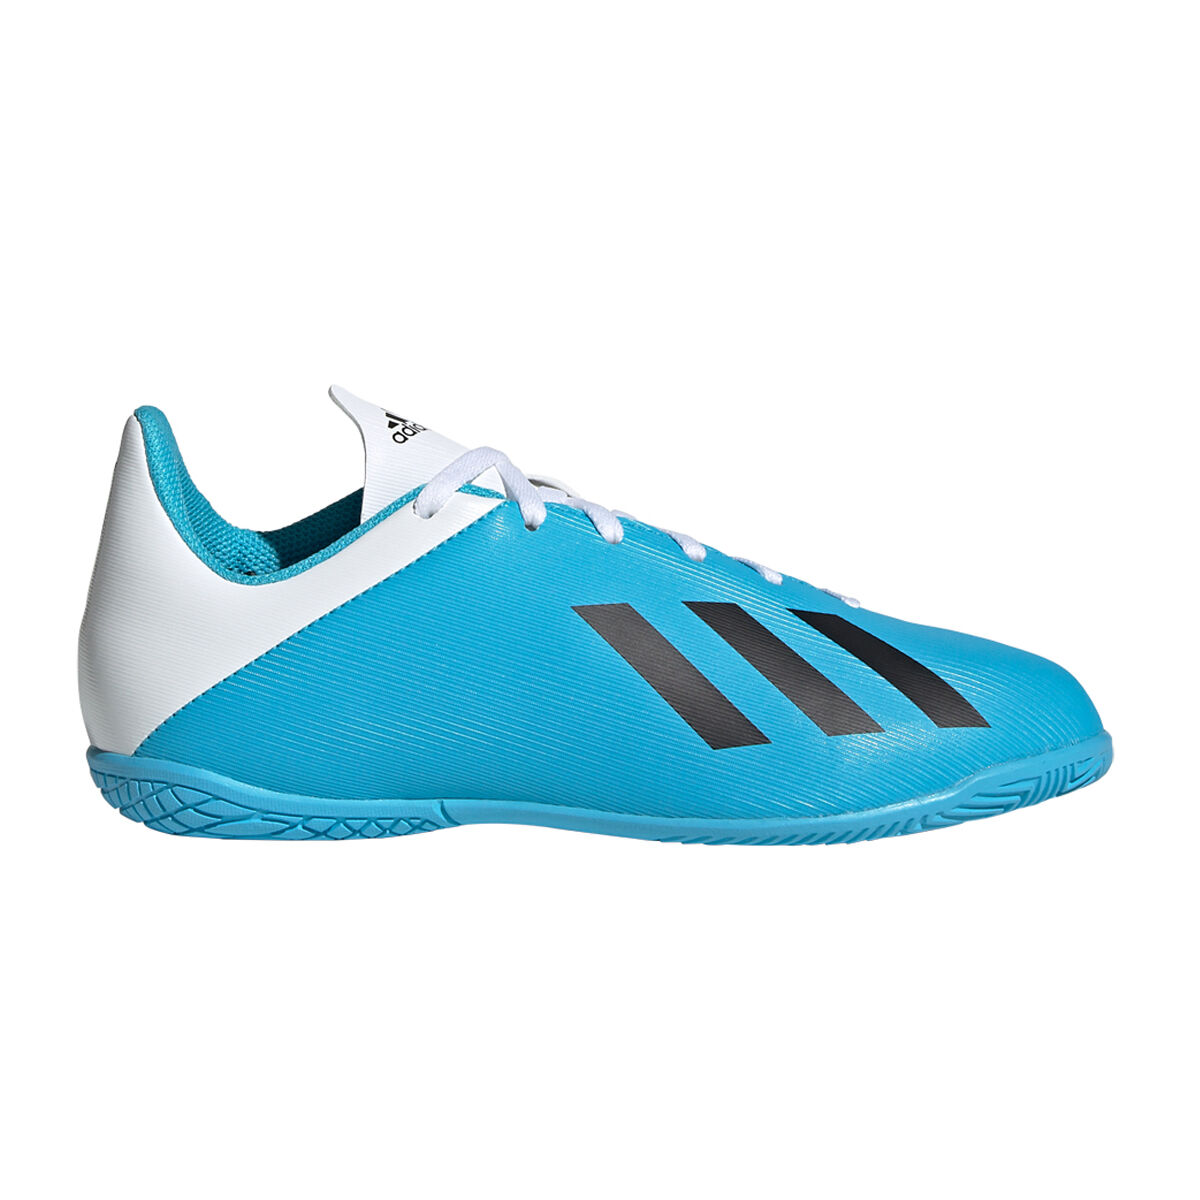 youth boys indoor soccer shoes